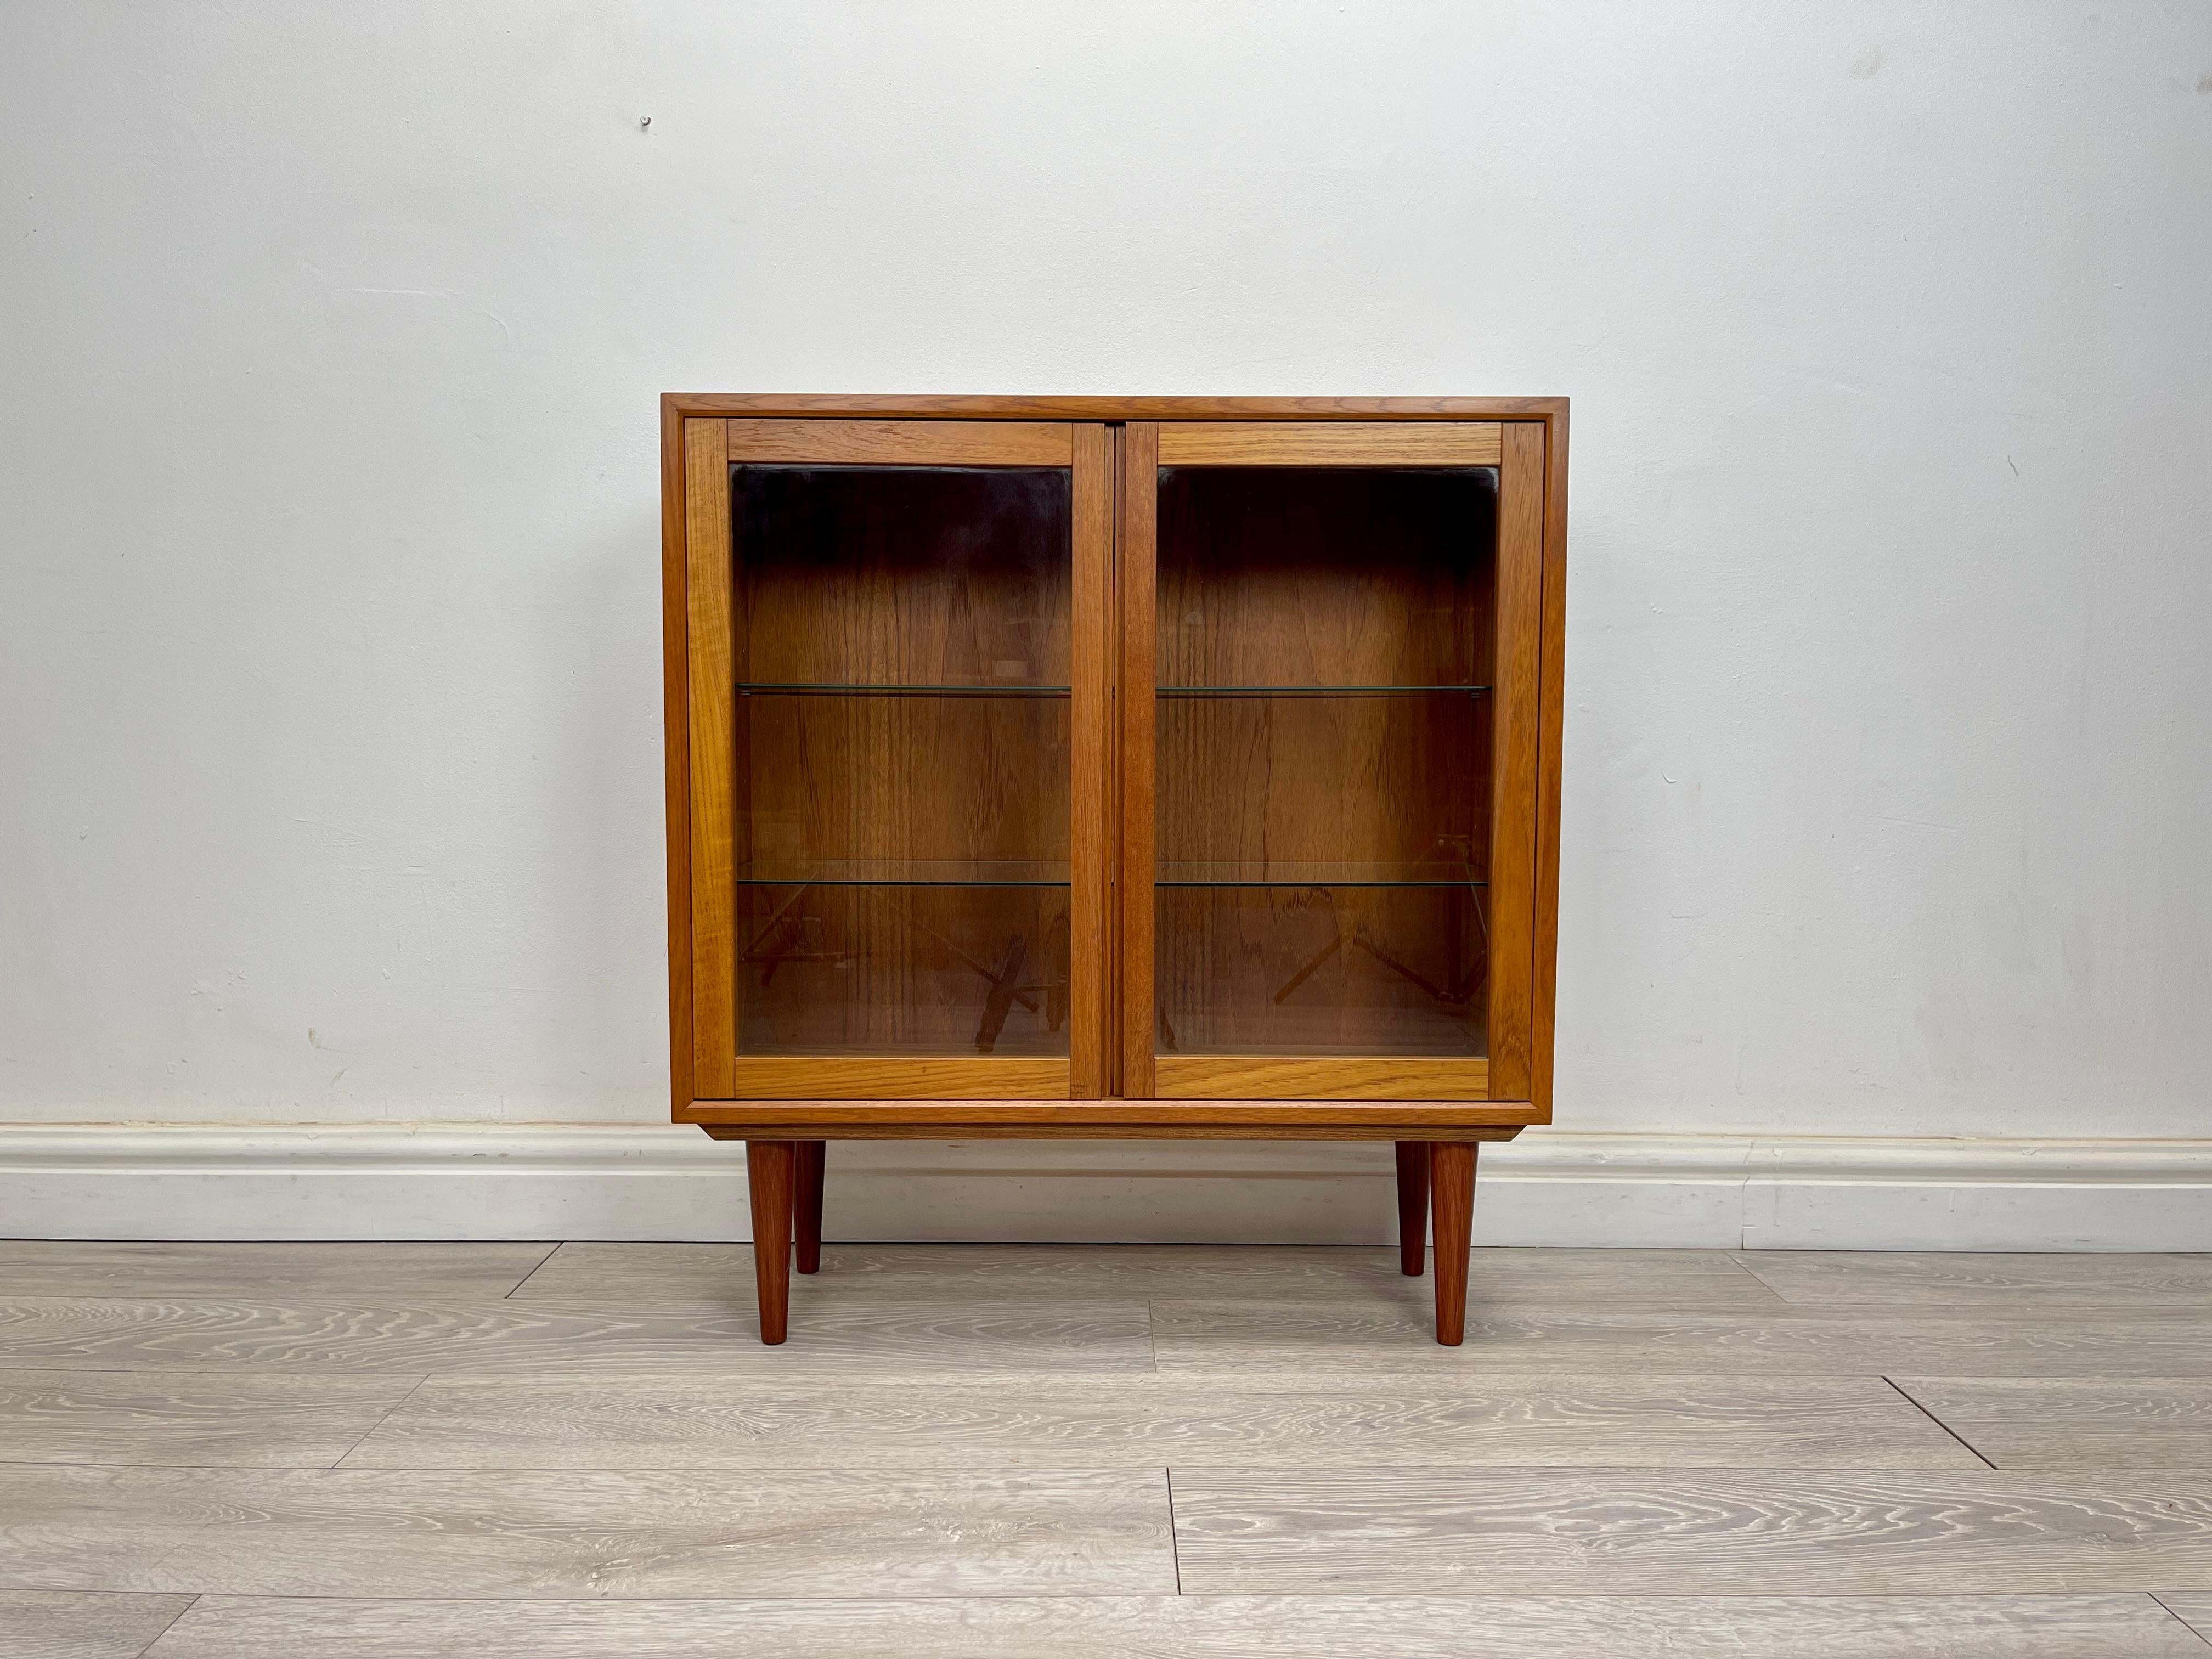 BOOKCASE
Midcentury Danish Teak Bookcase/ display cabinet by Poul Cadovius cir 1970 . The cabinet stands on round tapered legs has stunning grain and patin through , there two glazed doors with two adjustable glass shelves . 

Dimension 
Height-